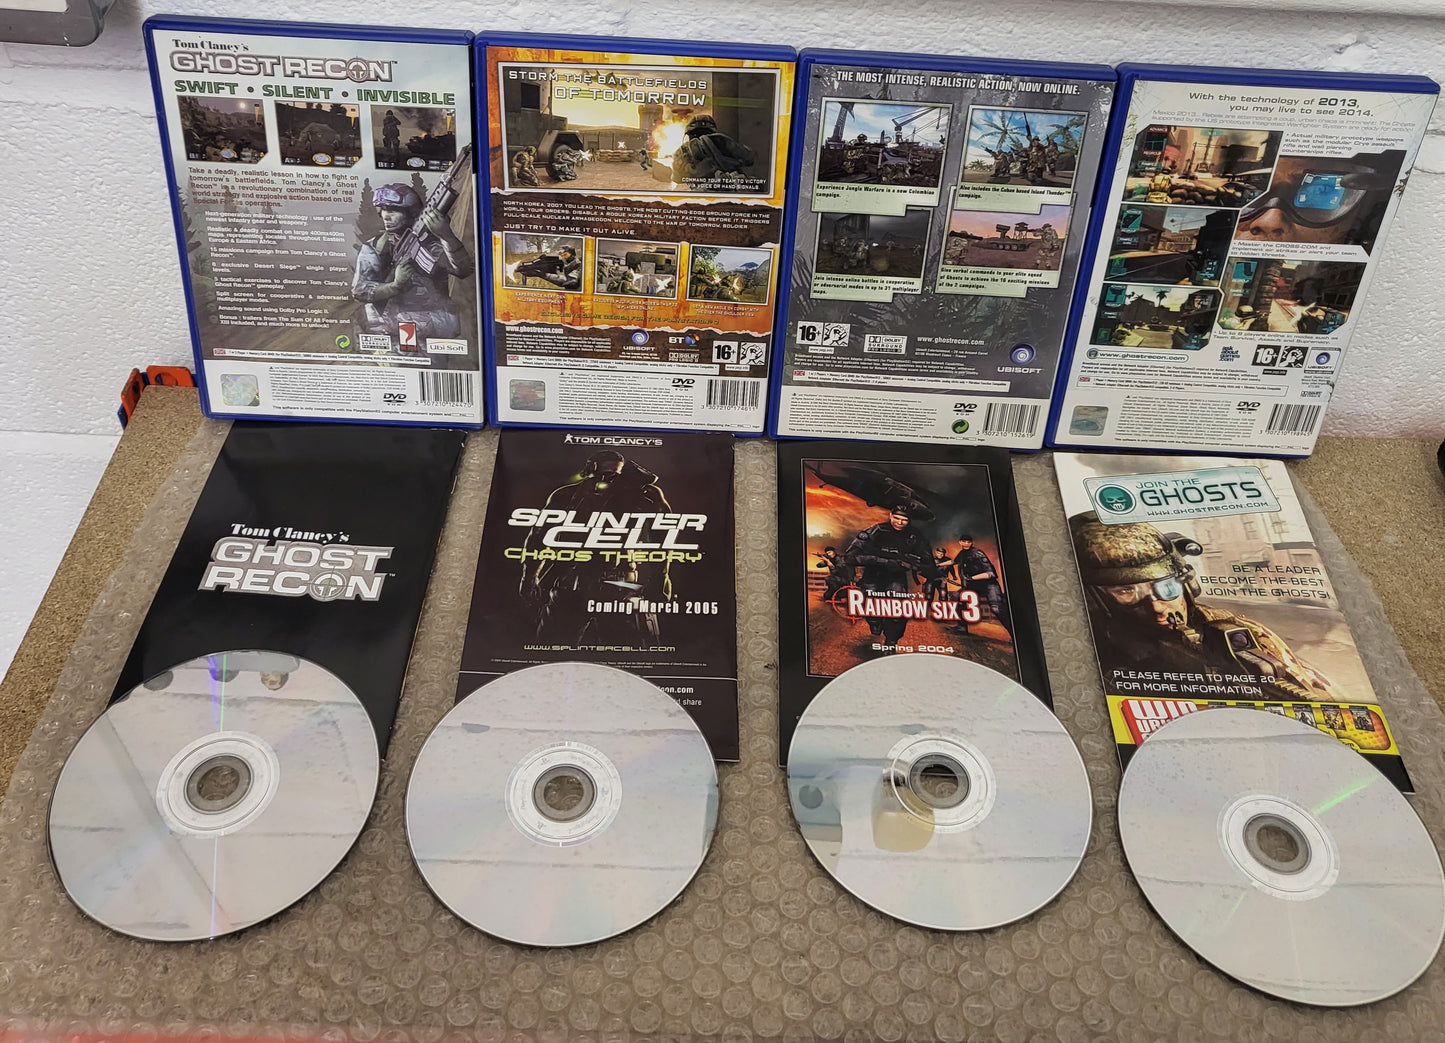 Tom Clancy's Ghost Recon X 4 Sony Playstation 2 (PS2) Game Bundle